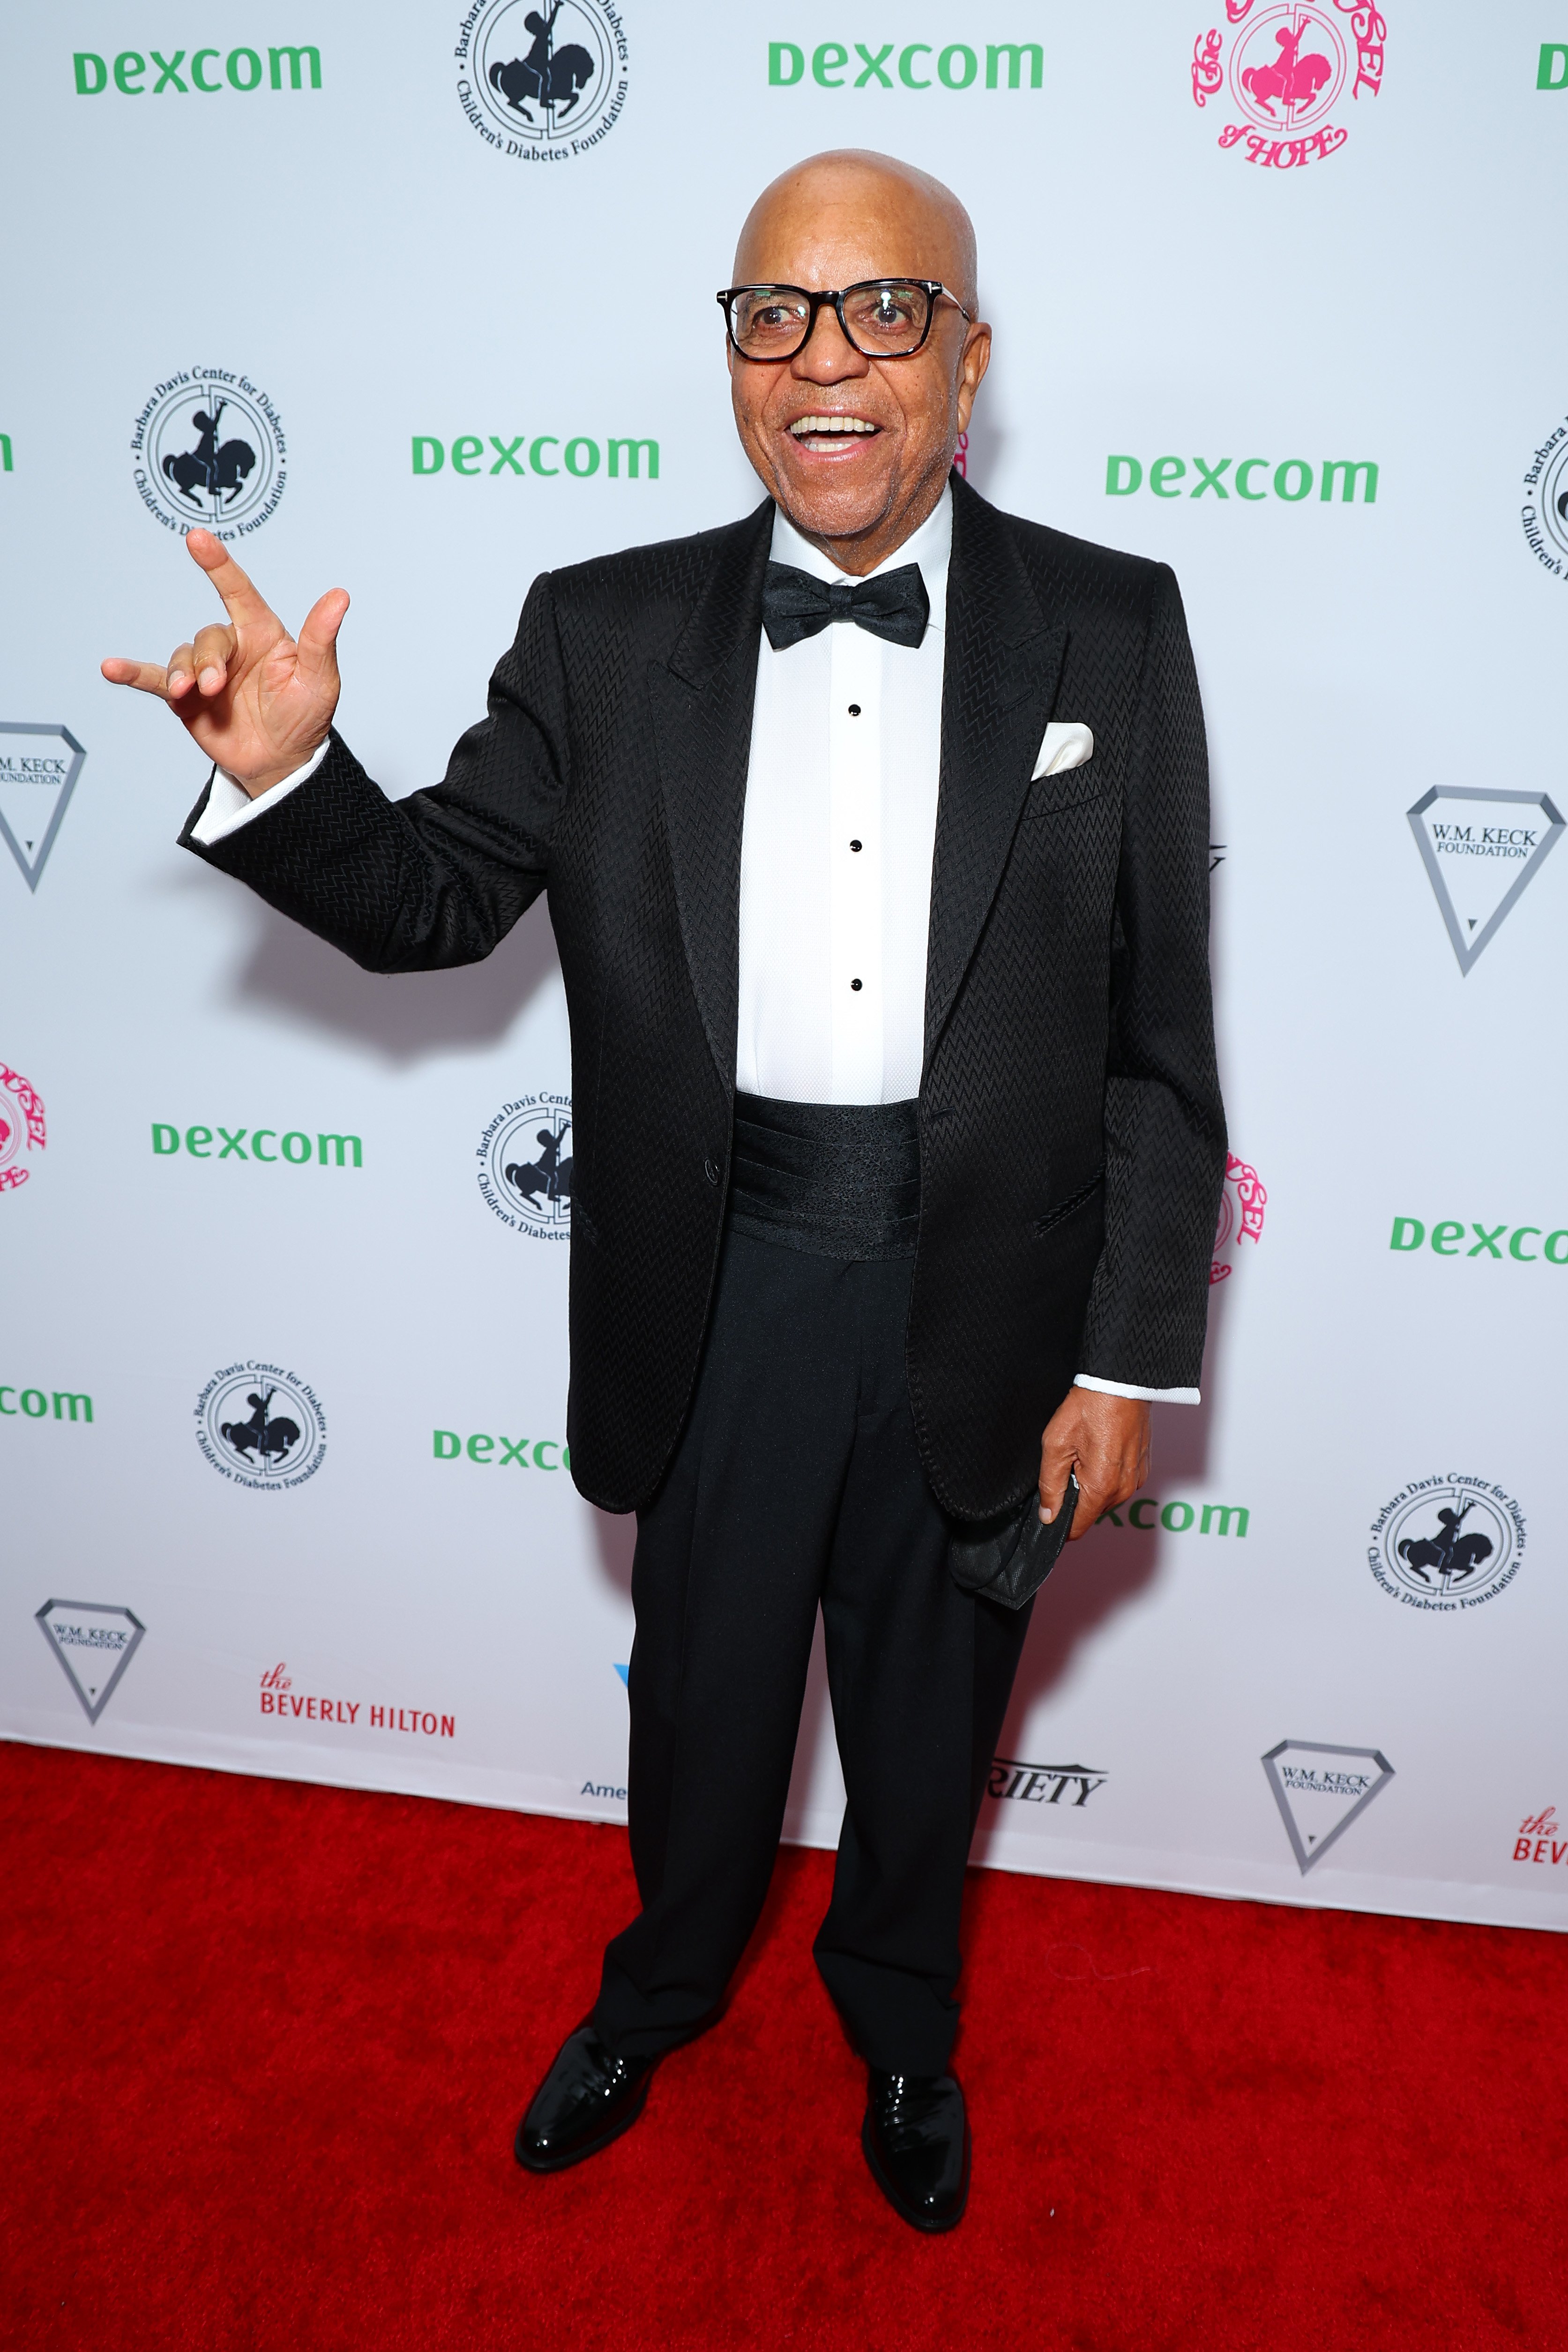 Berry Gordy at the 36th Carousel of Hope Ball Honoring Diane Keaton on October 8, 2022, in California | Source: Getty Images